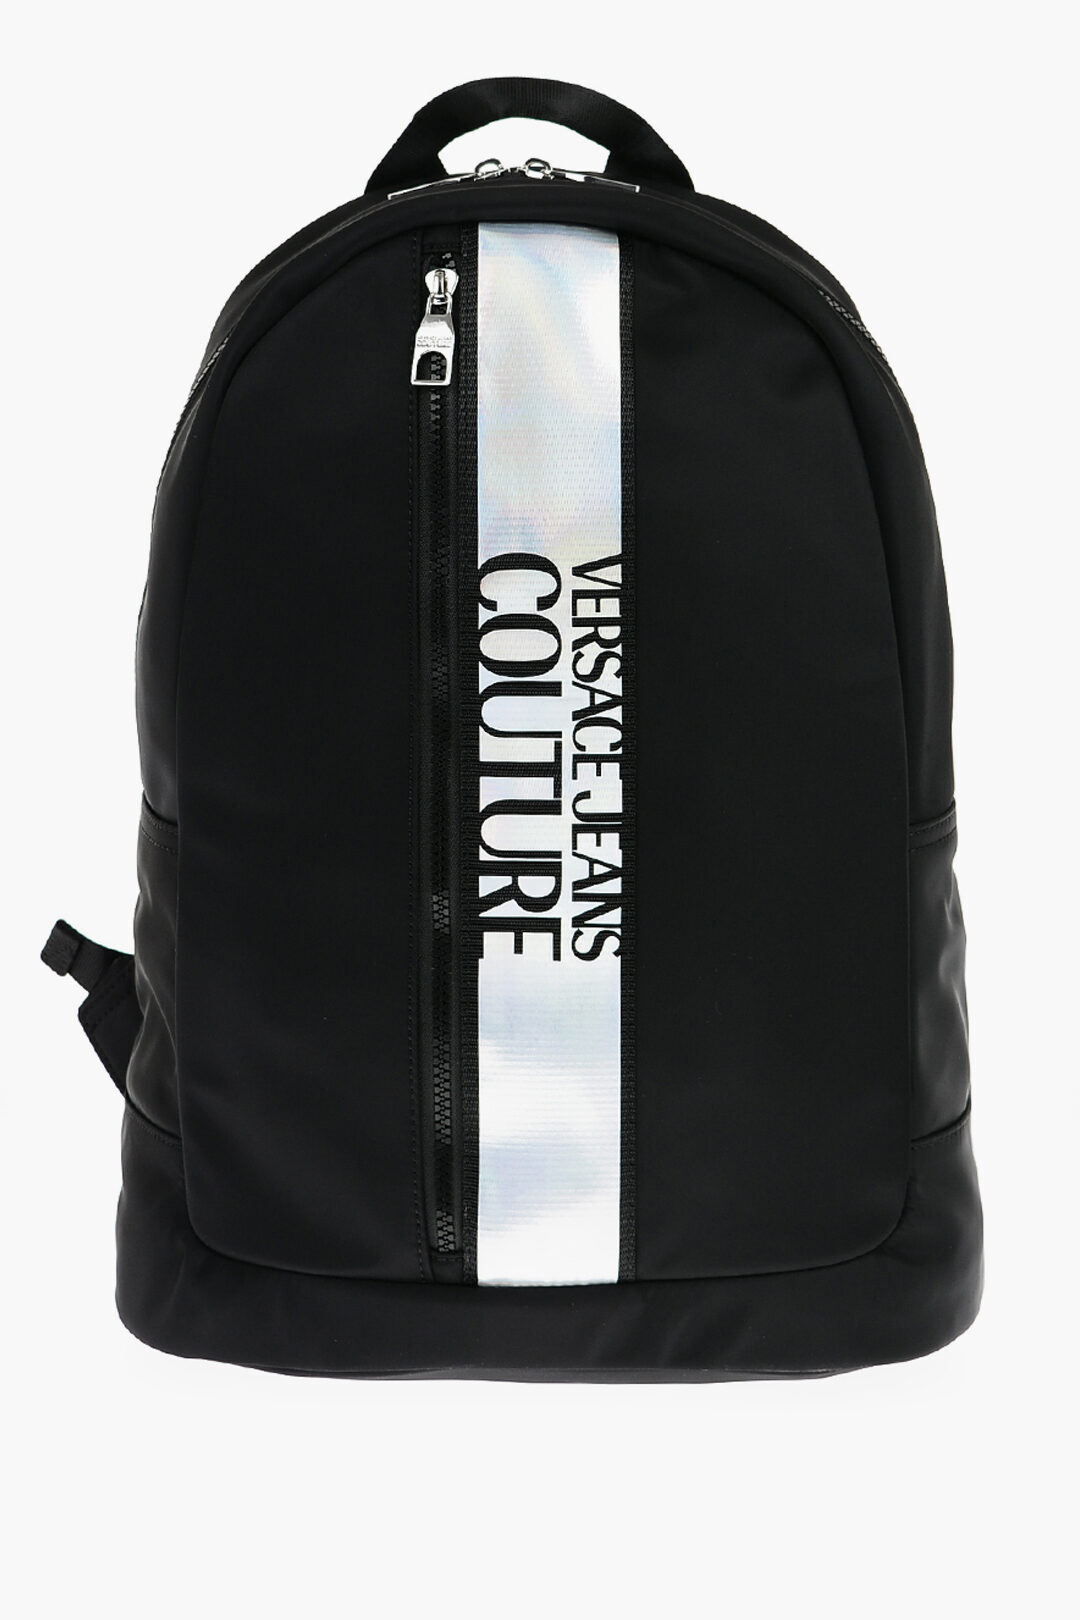  VERSACE ヴェルサーチ バックパック 75YA4B91 ZS927 LD2 メンズ JEANS COUTURE NYLON BACKPACK WITH CONTRASTING LOGOED DETAIL  dk